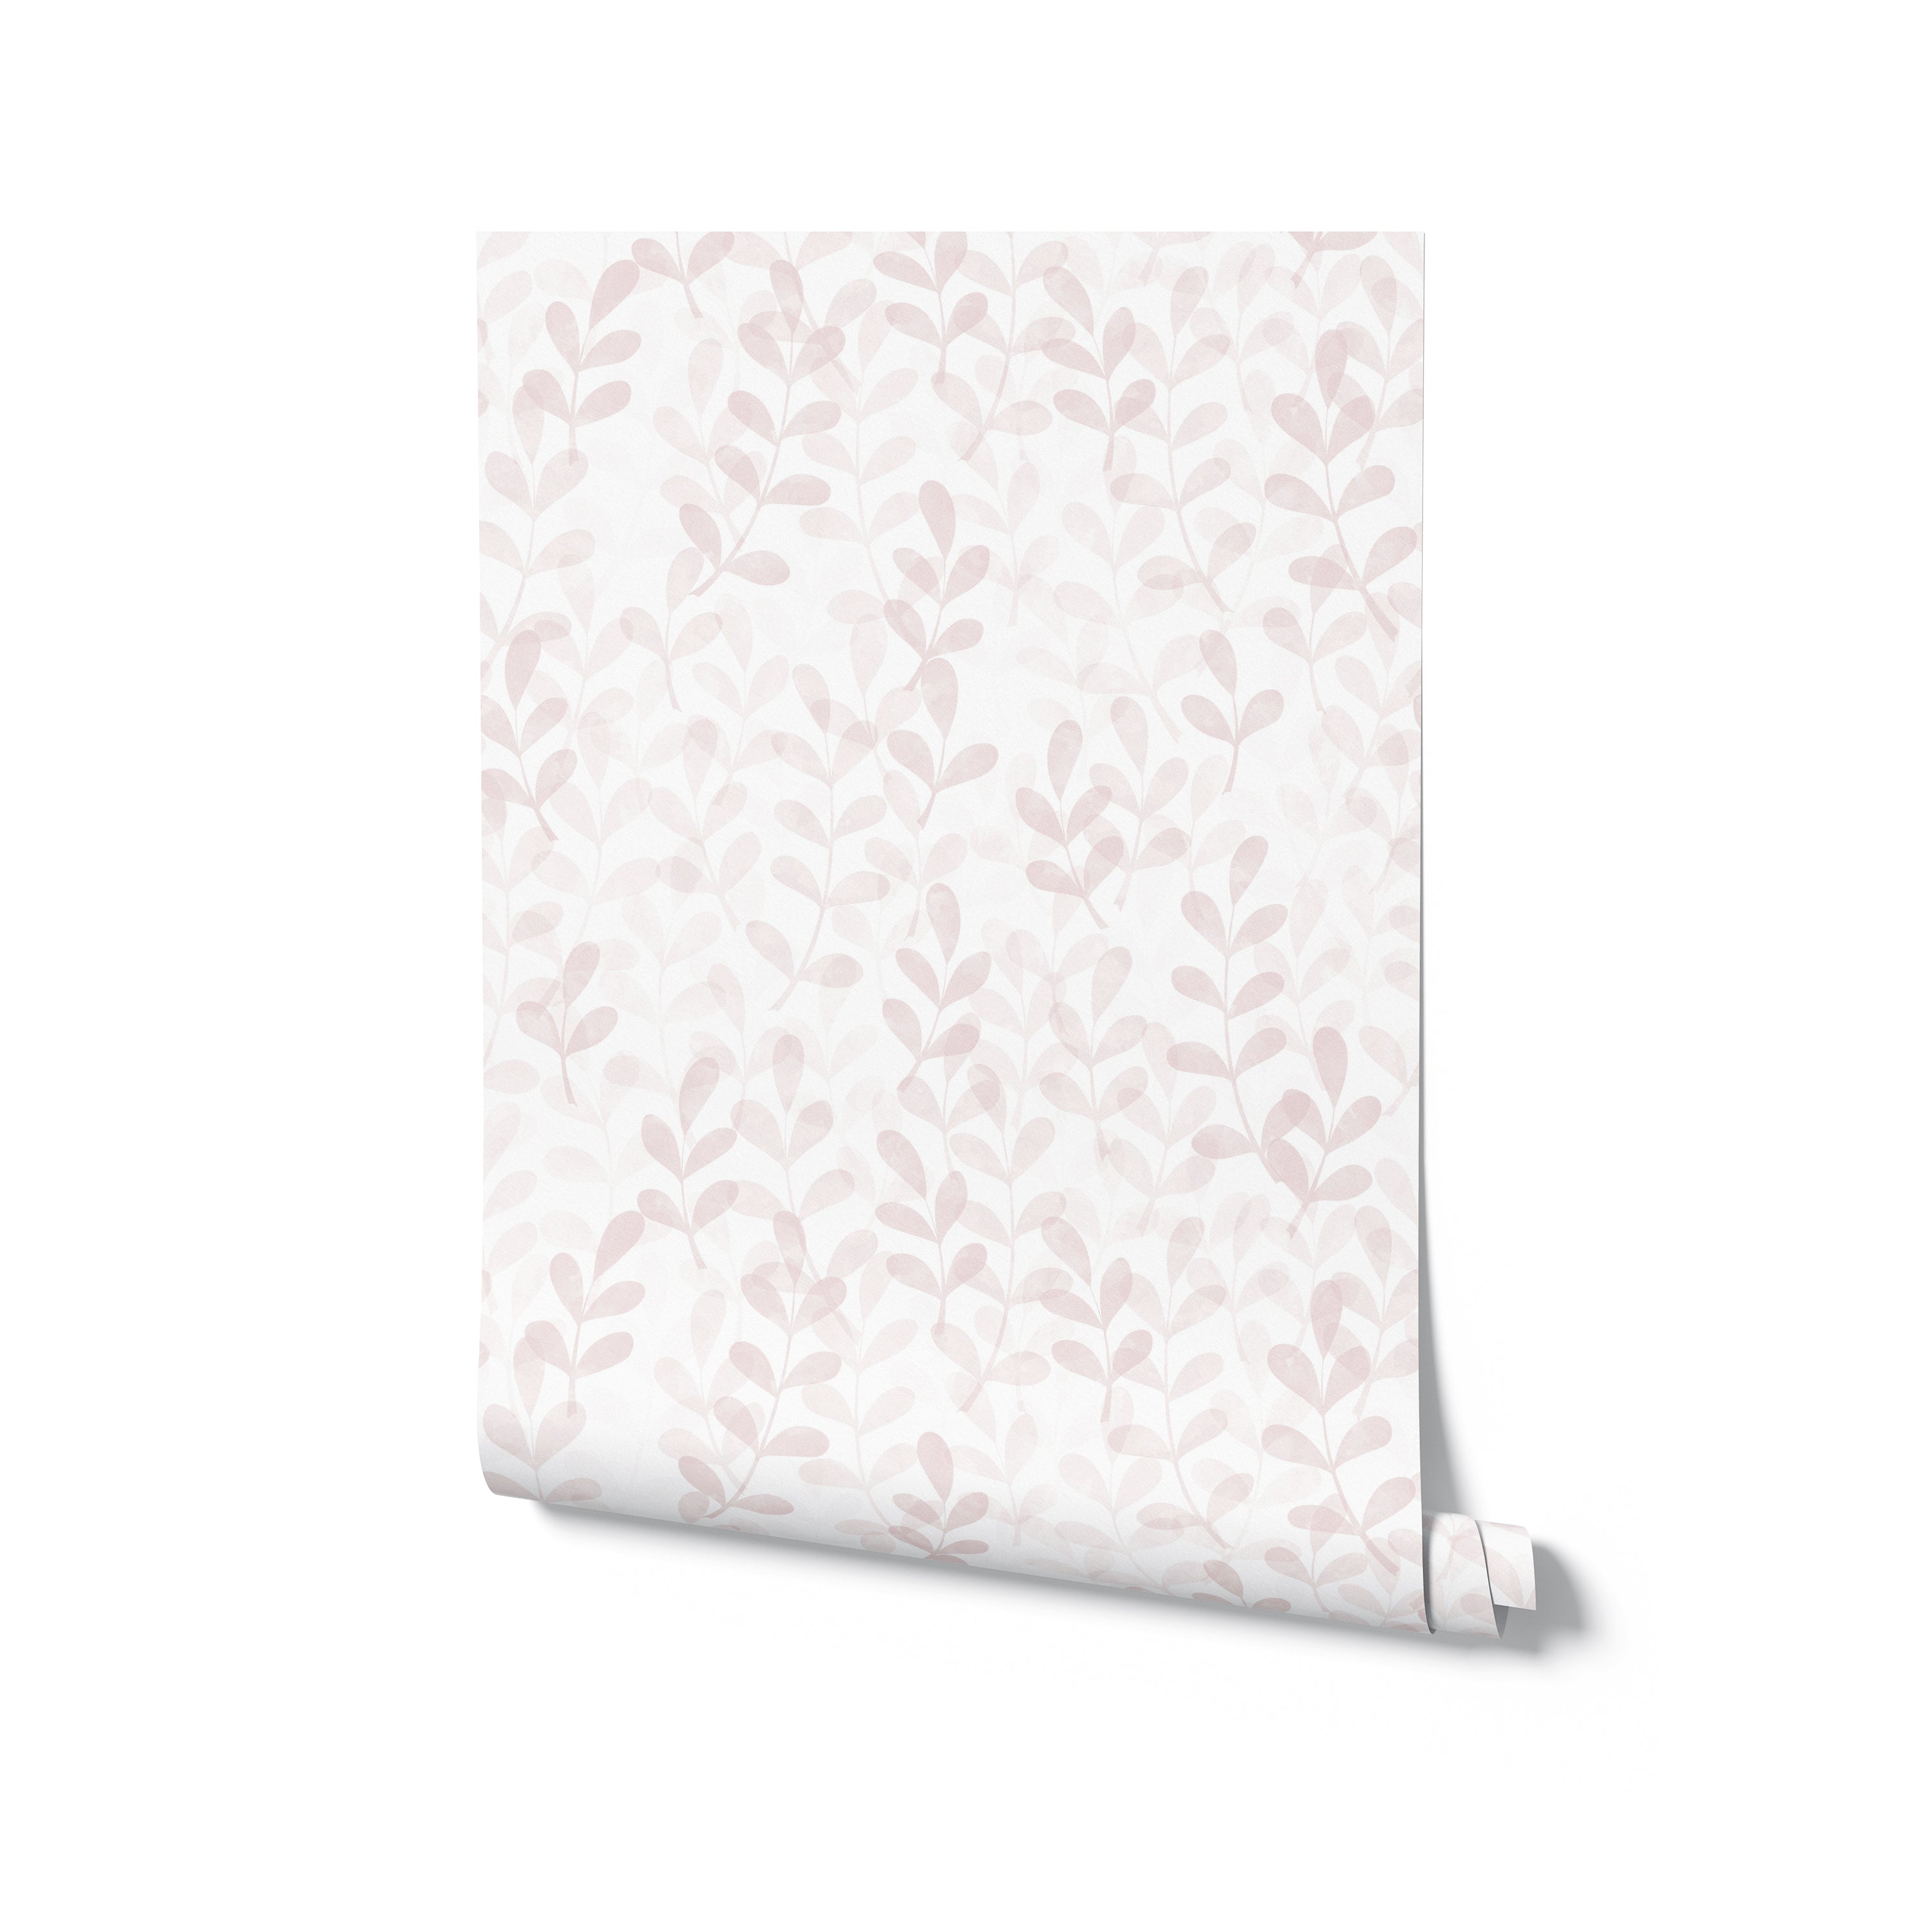 A roll of wallpaper featuring a light pink leafy pattern on a white background. The small leaves are arranged vertically, giving the design a gentle and elegant feel.